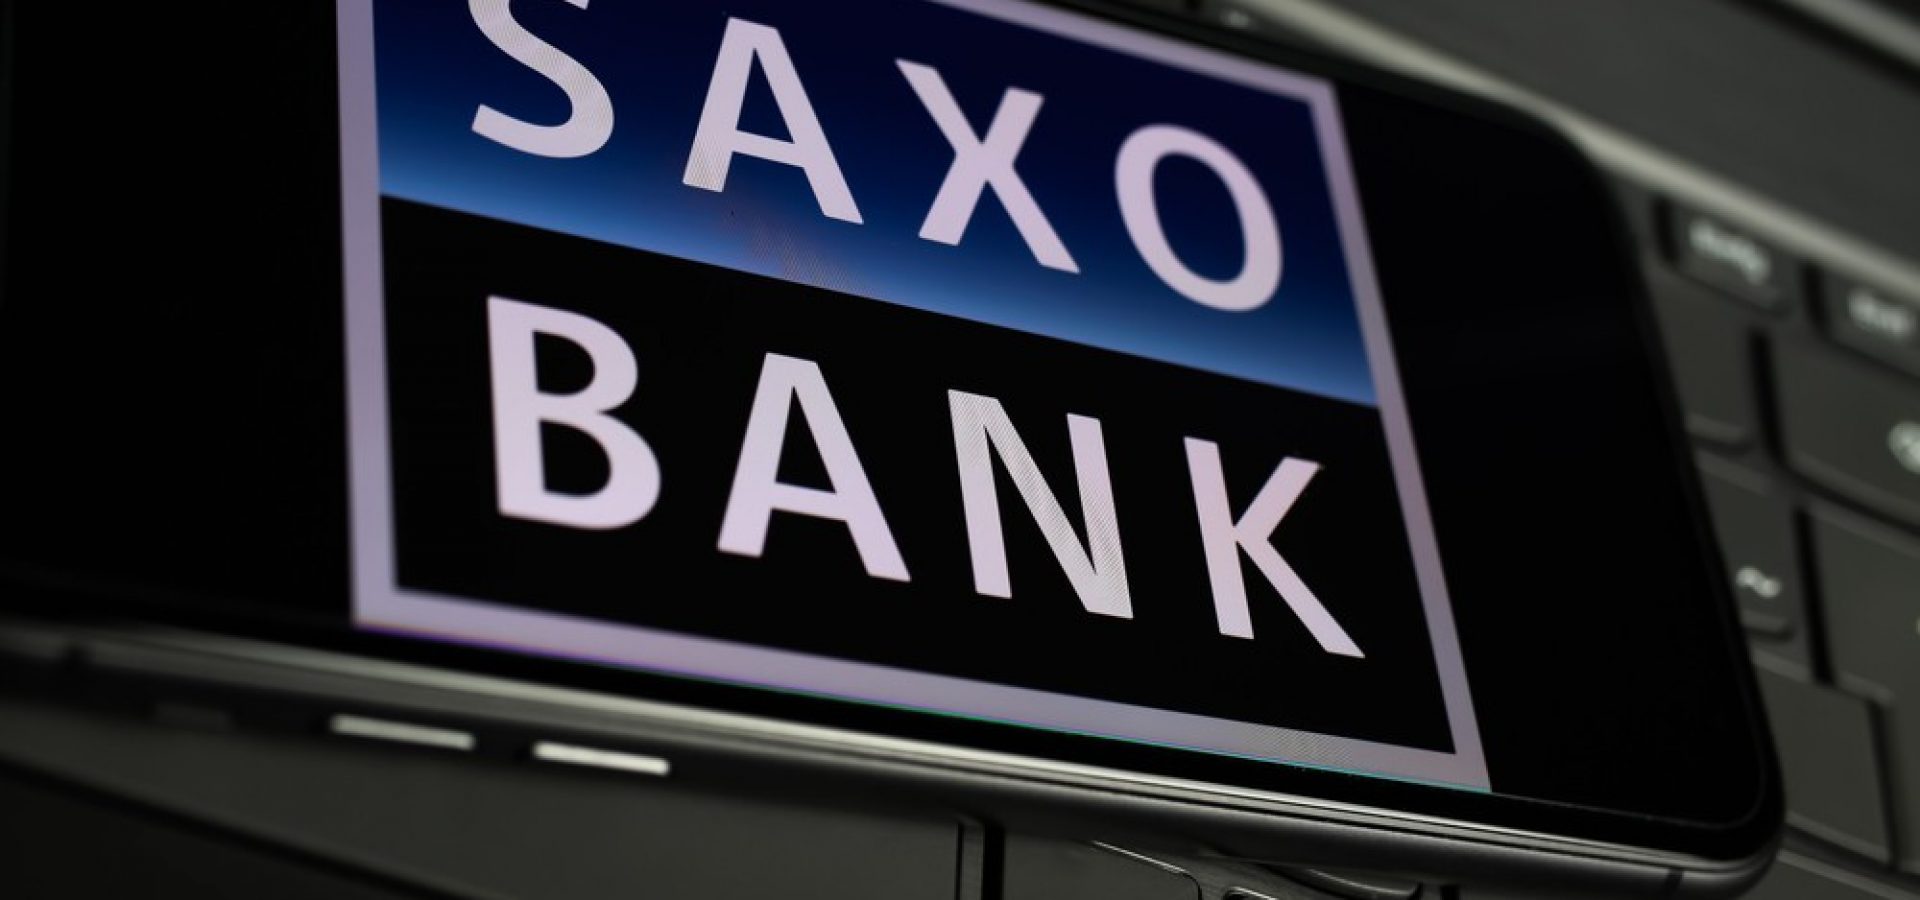 Saxo Bank Records a 35% Higher FX Trading Volume in March